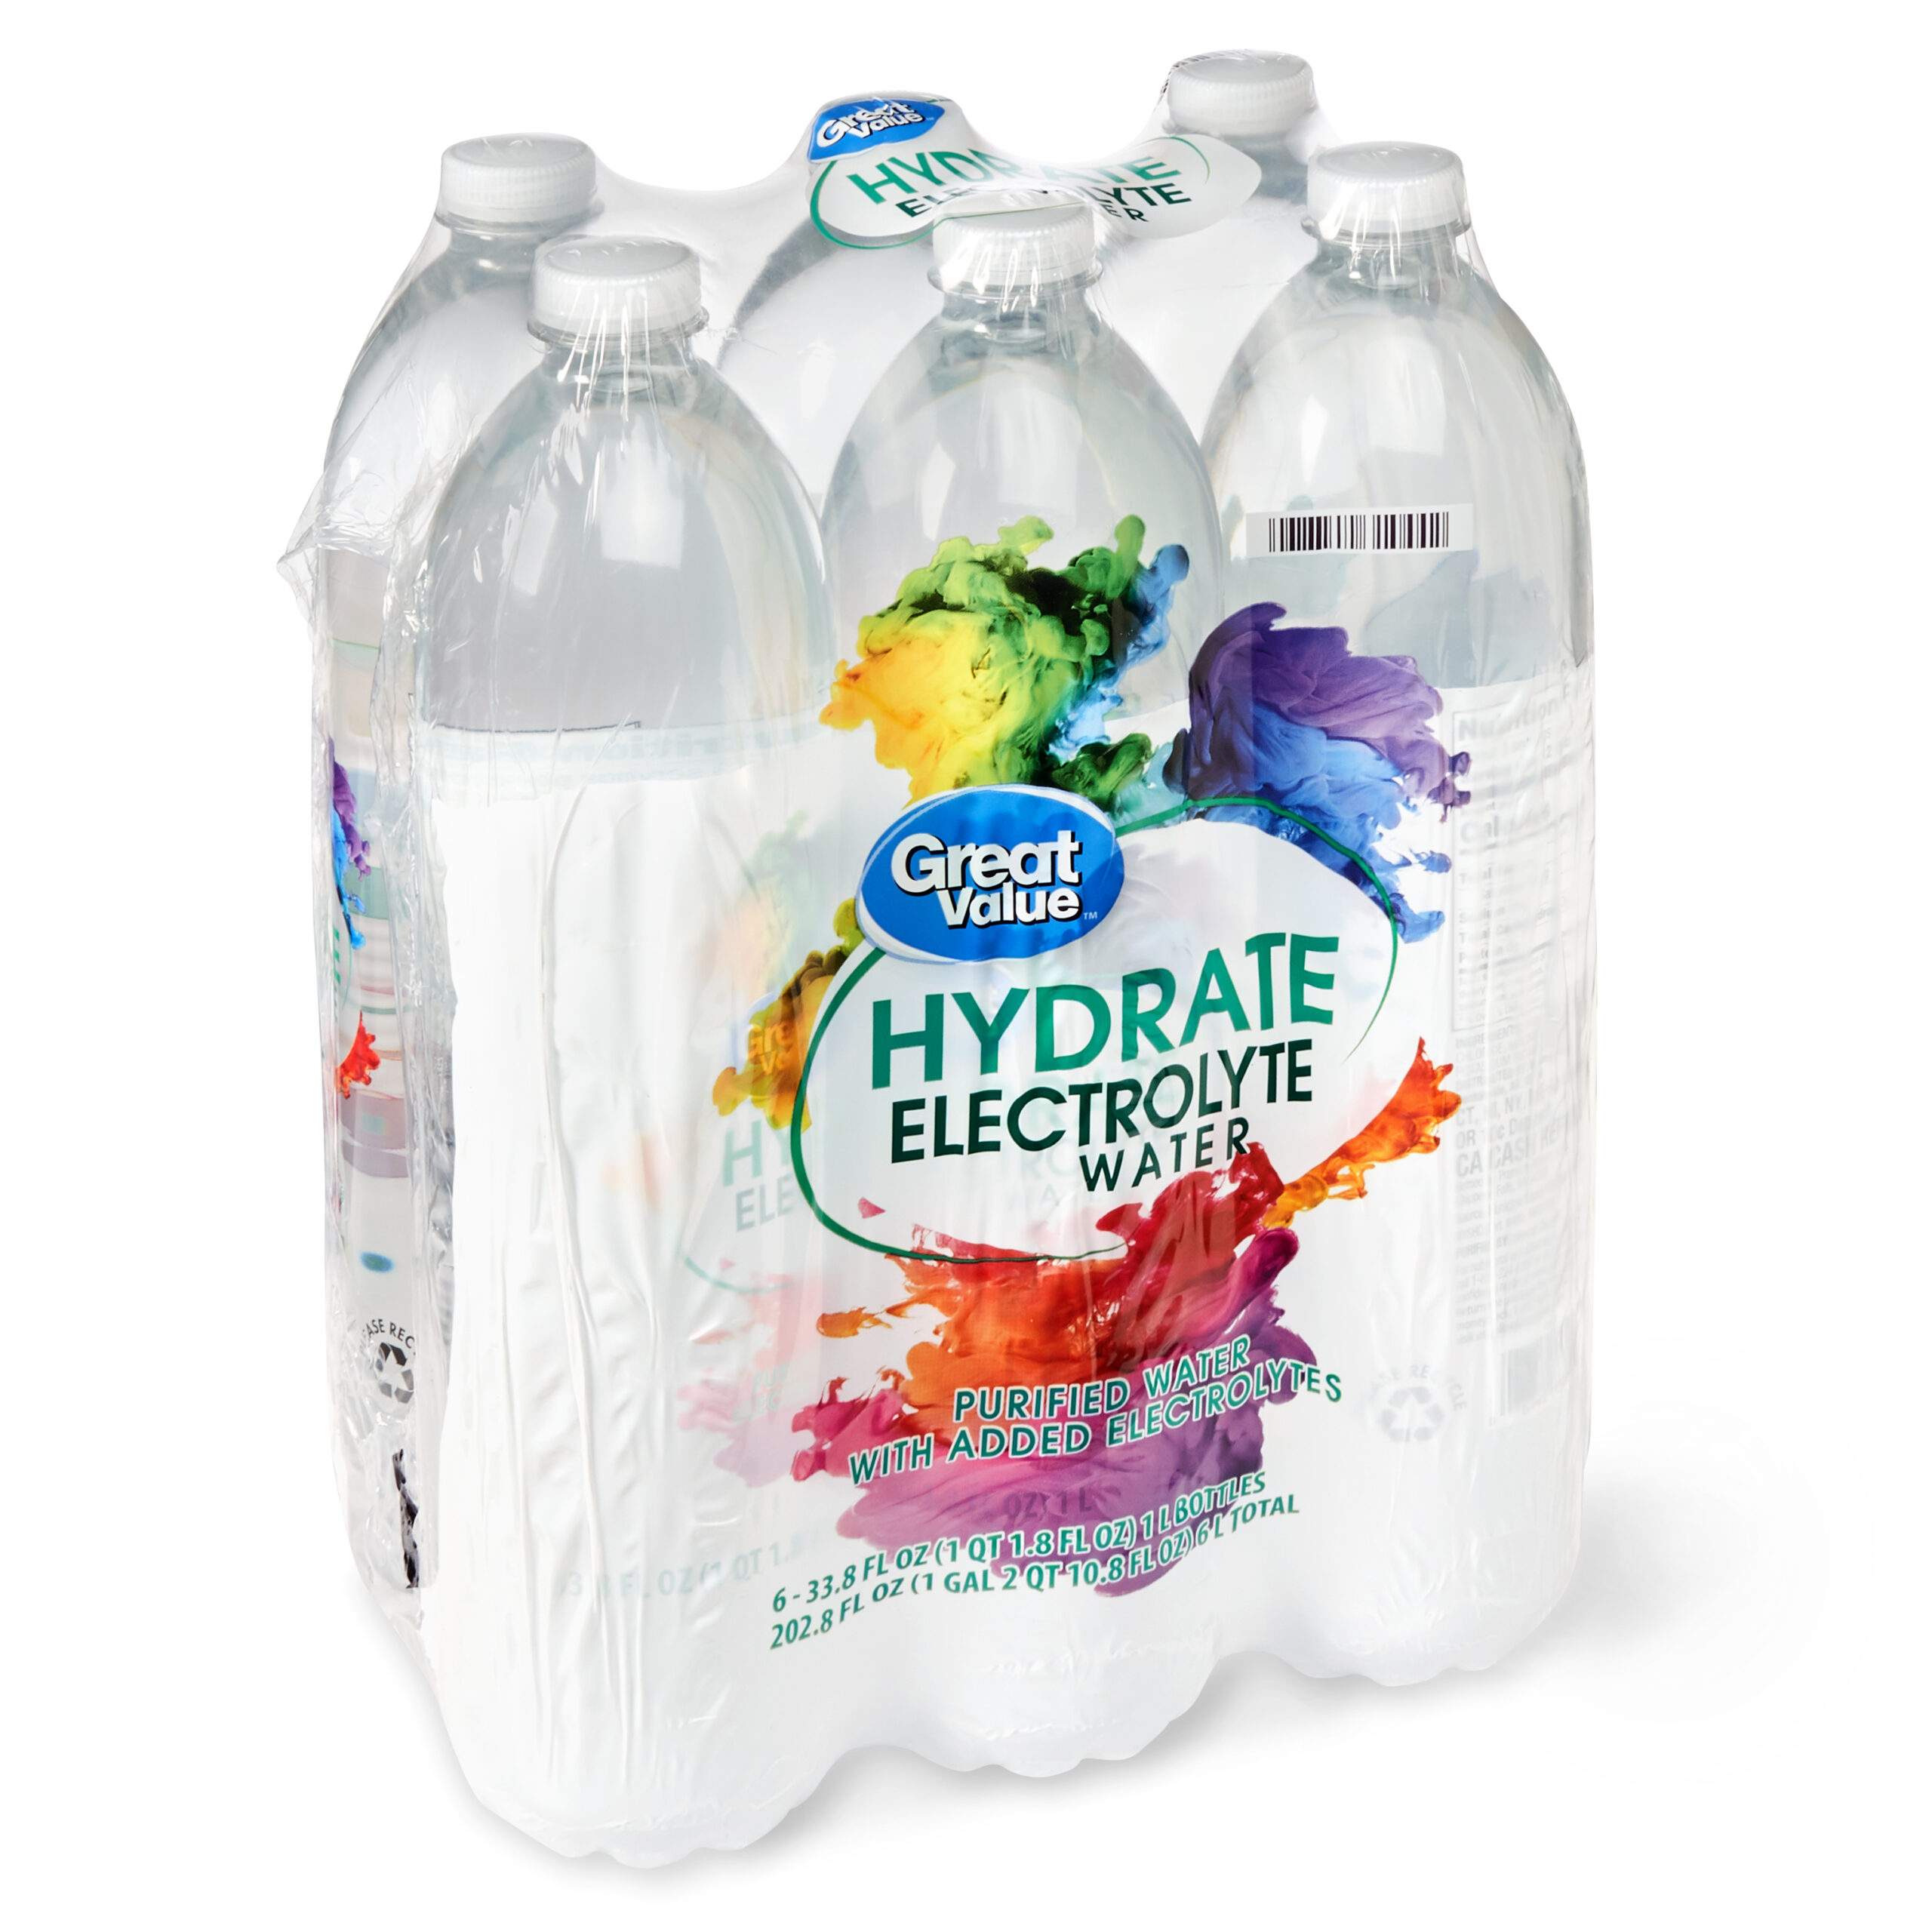 Great Value Hydrate Electrolyte Water, 1L, 6 Count CrowdedLine Delivery